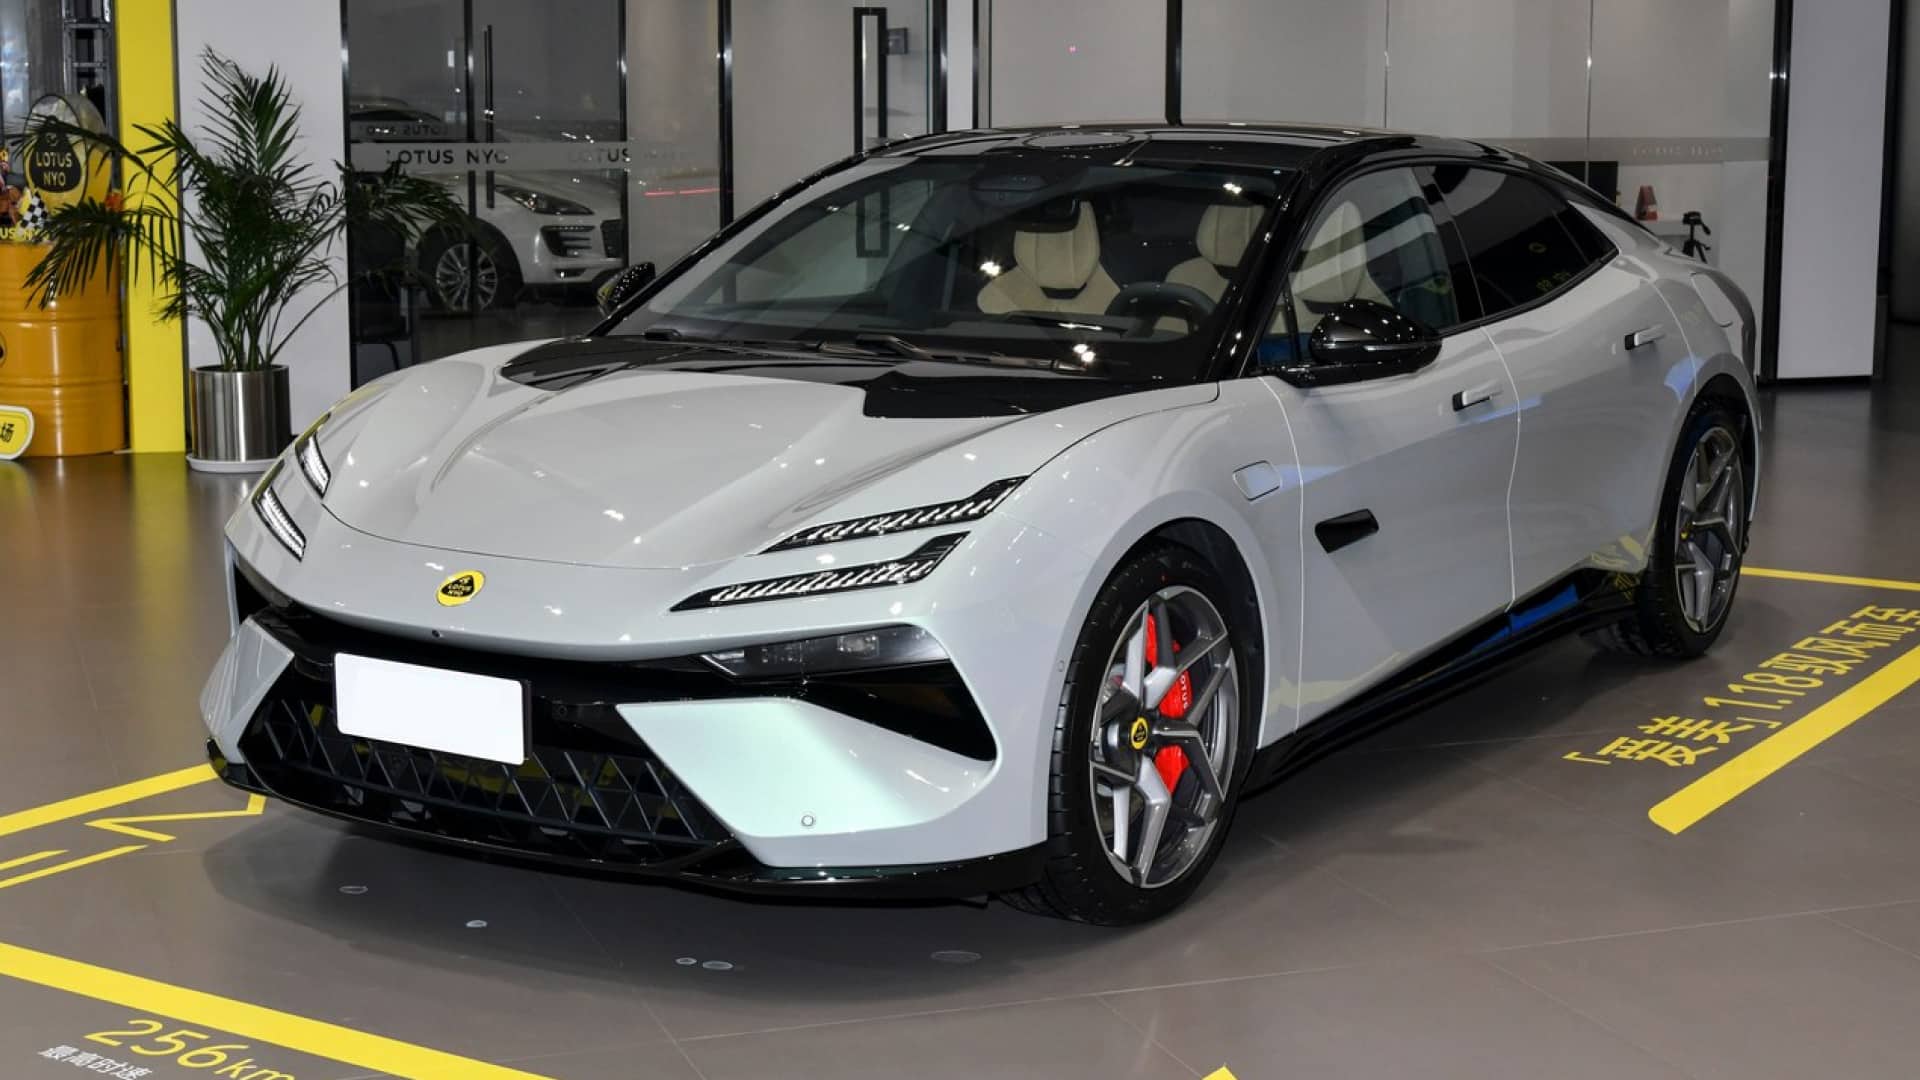 Lotus Emeya starts sales in China with 675 kW at 93,750 USD